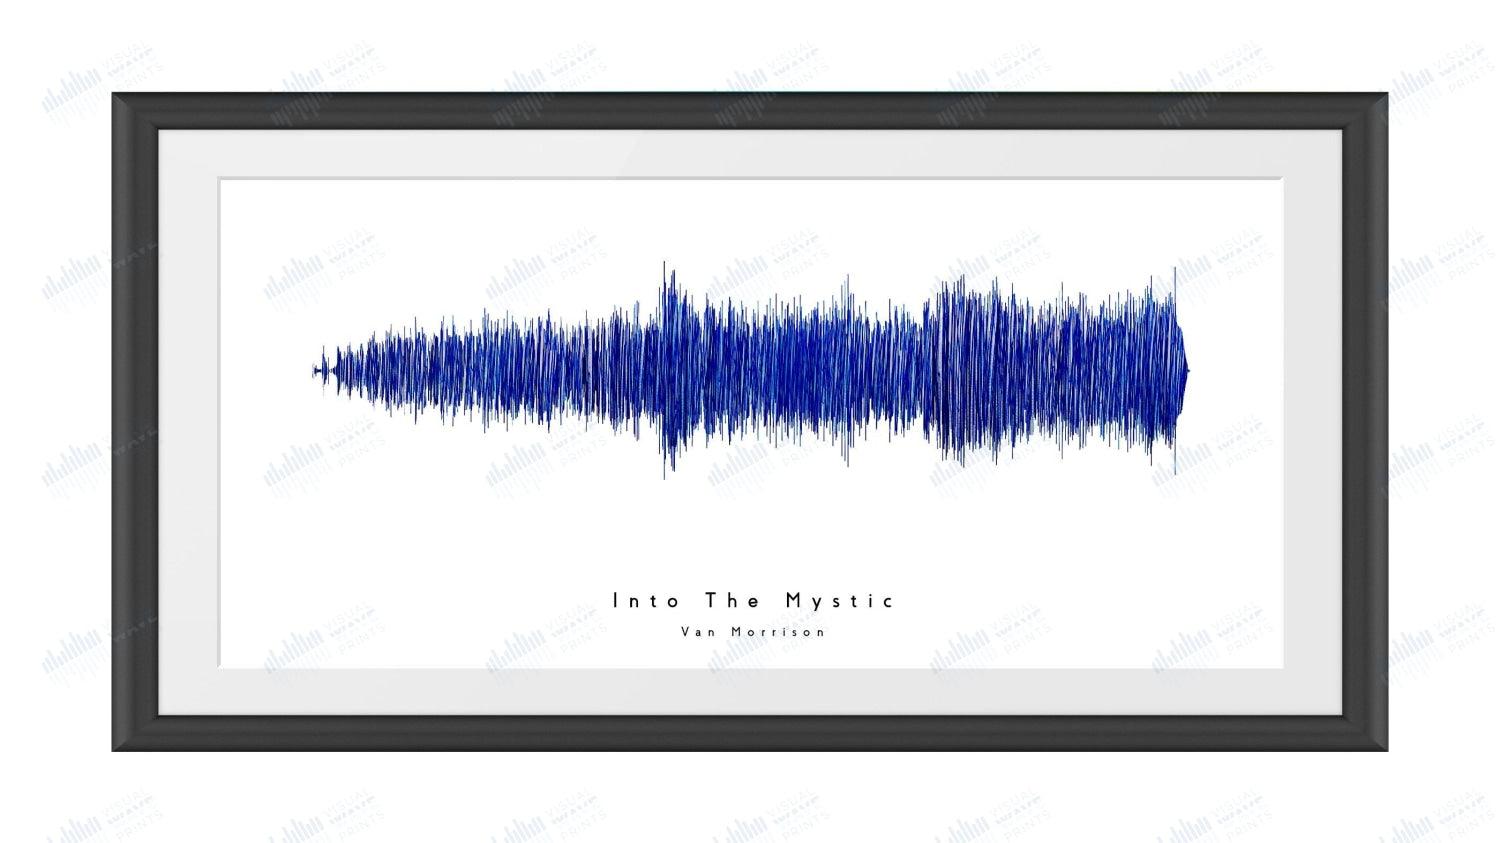 Into the Mystic by Van Morrison - Visual Wave Prints